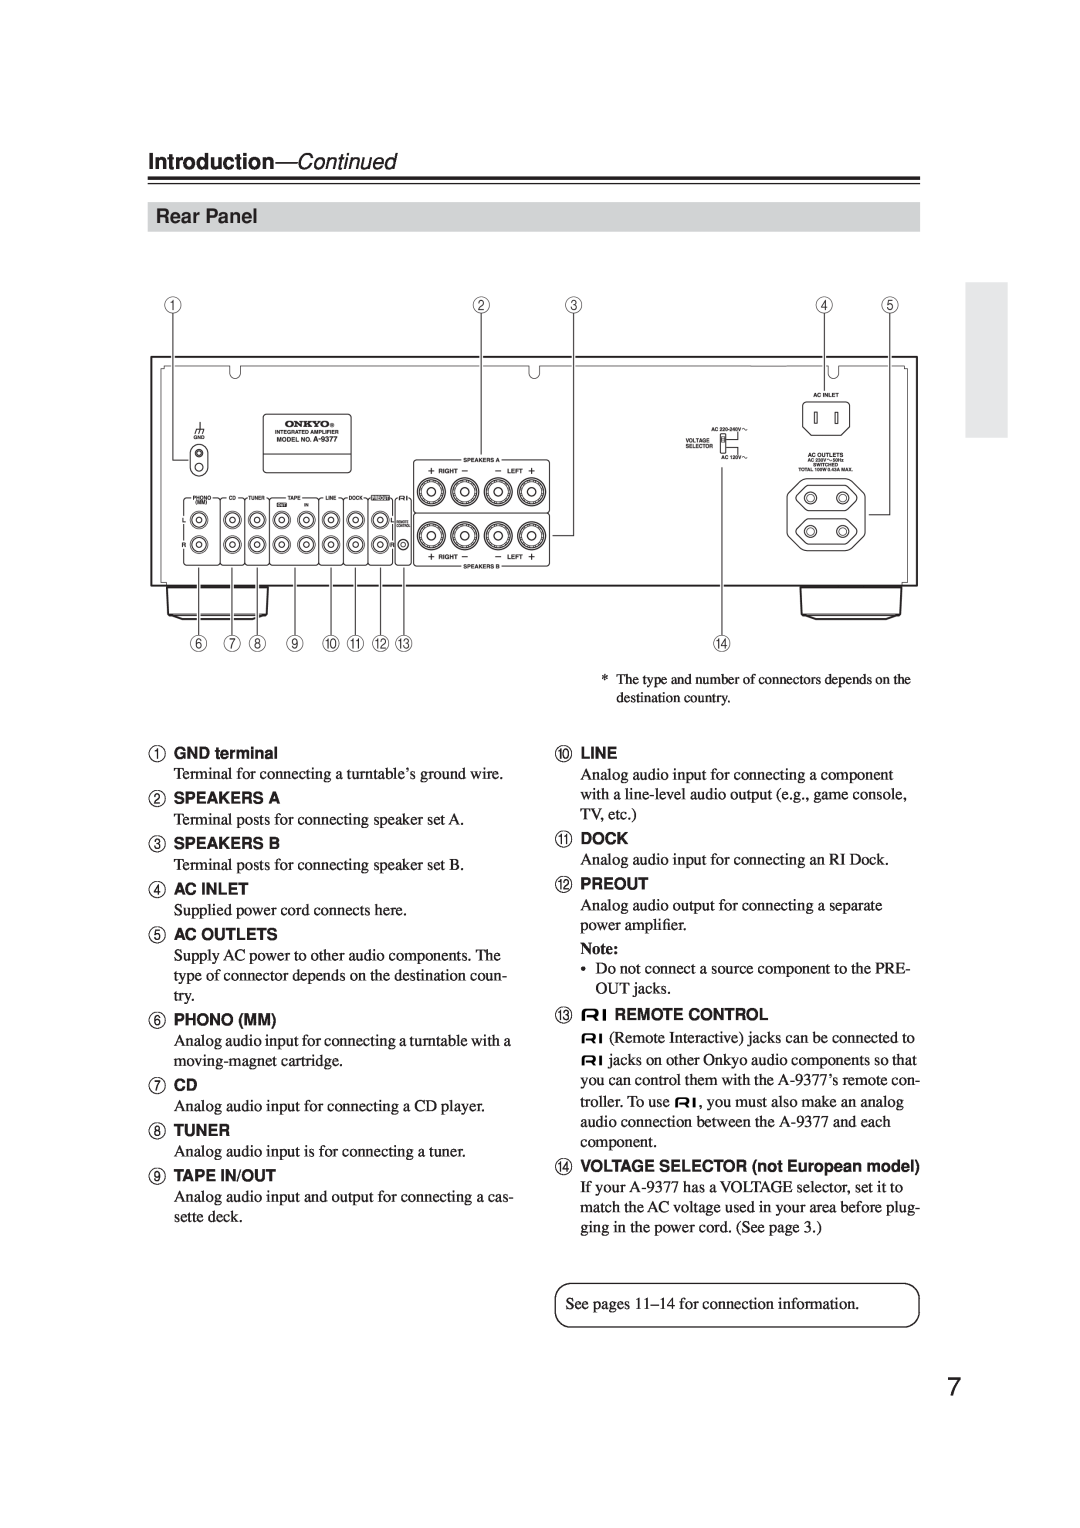 Onkyo A-9377 instruction manual Rear Panel, 6 7 8 9 J K L M, Introduction-Continued 